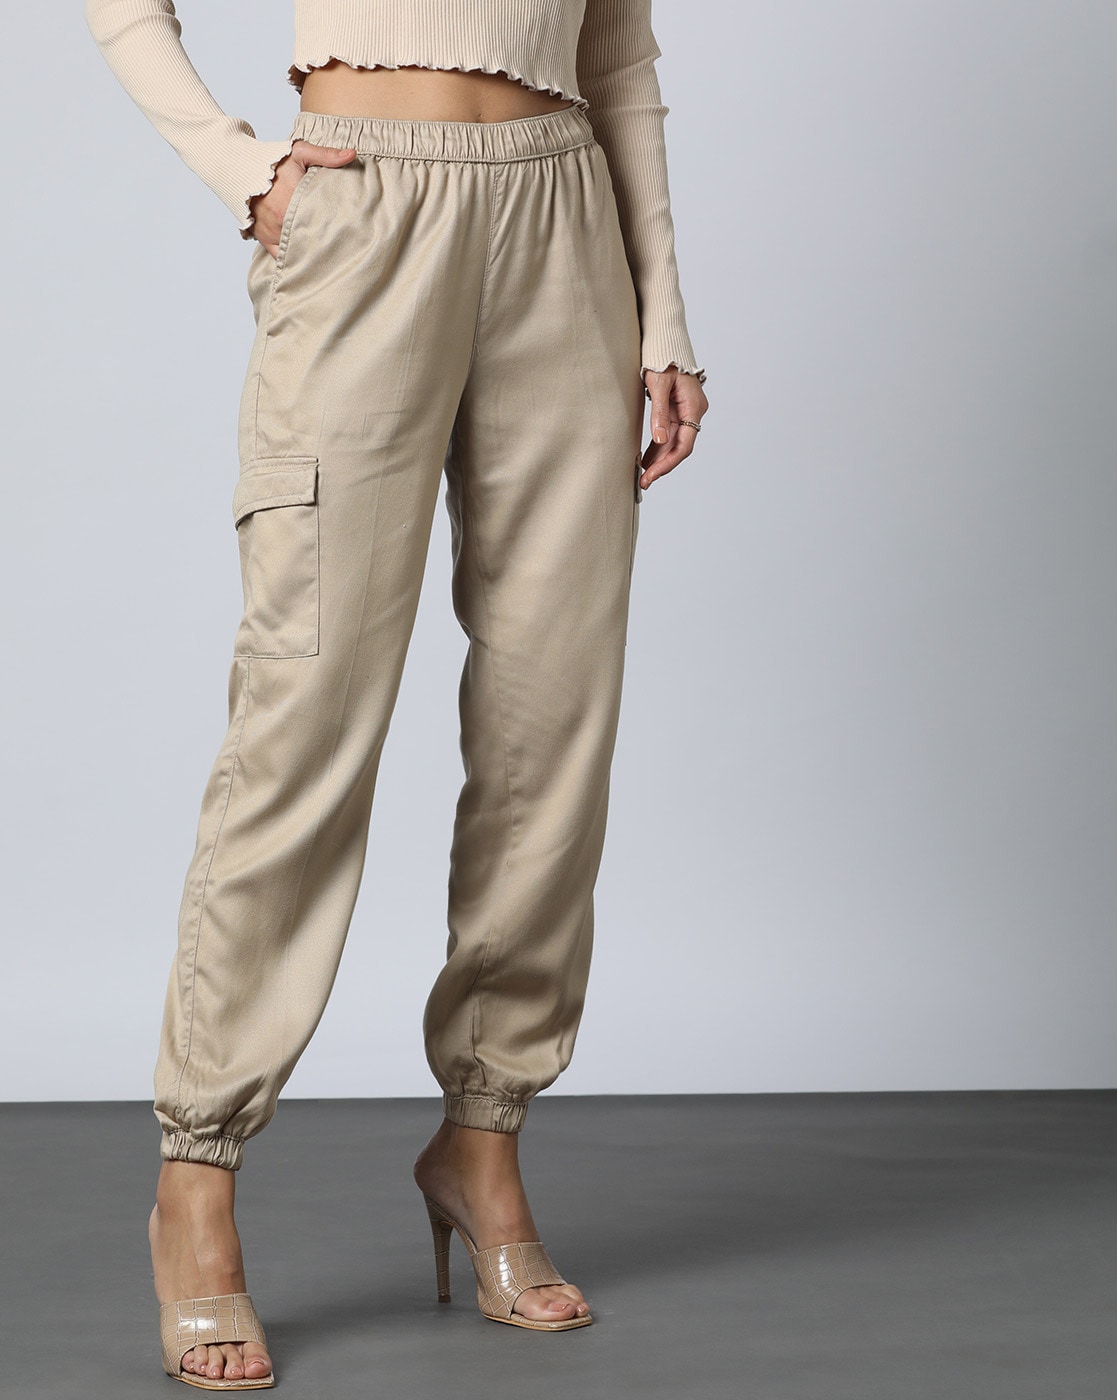 WOMEN LATEST CARGO TROUSERS WIDE LEG DENIMS CARGO PANTS  SIT ABOVE   NONSTRETCH FIT